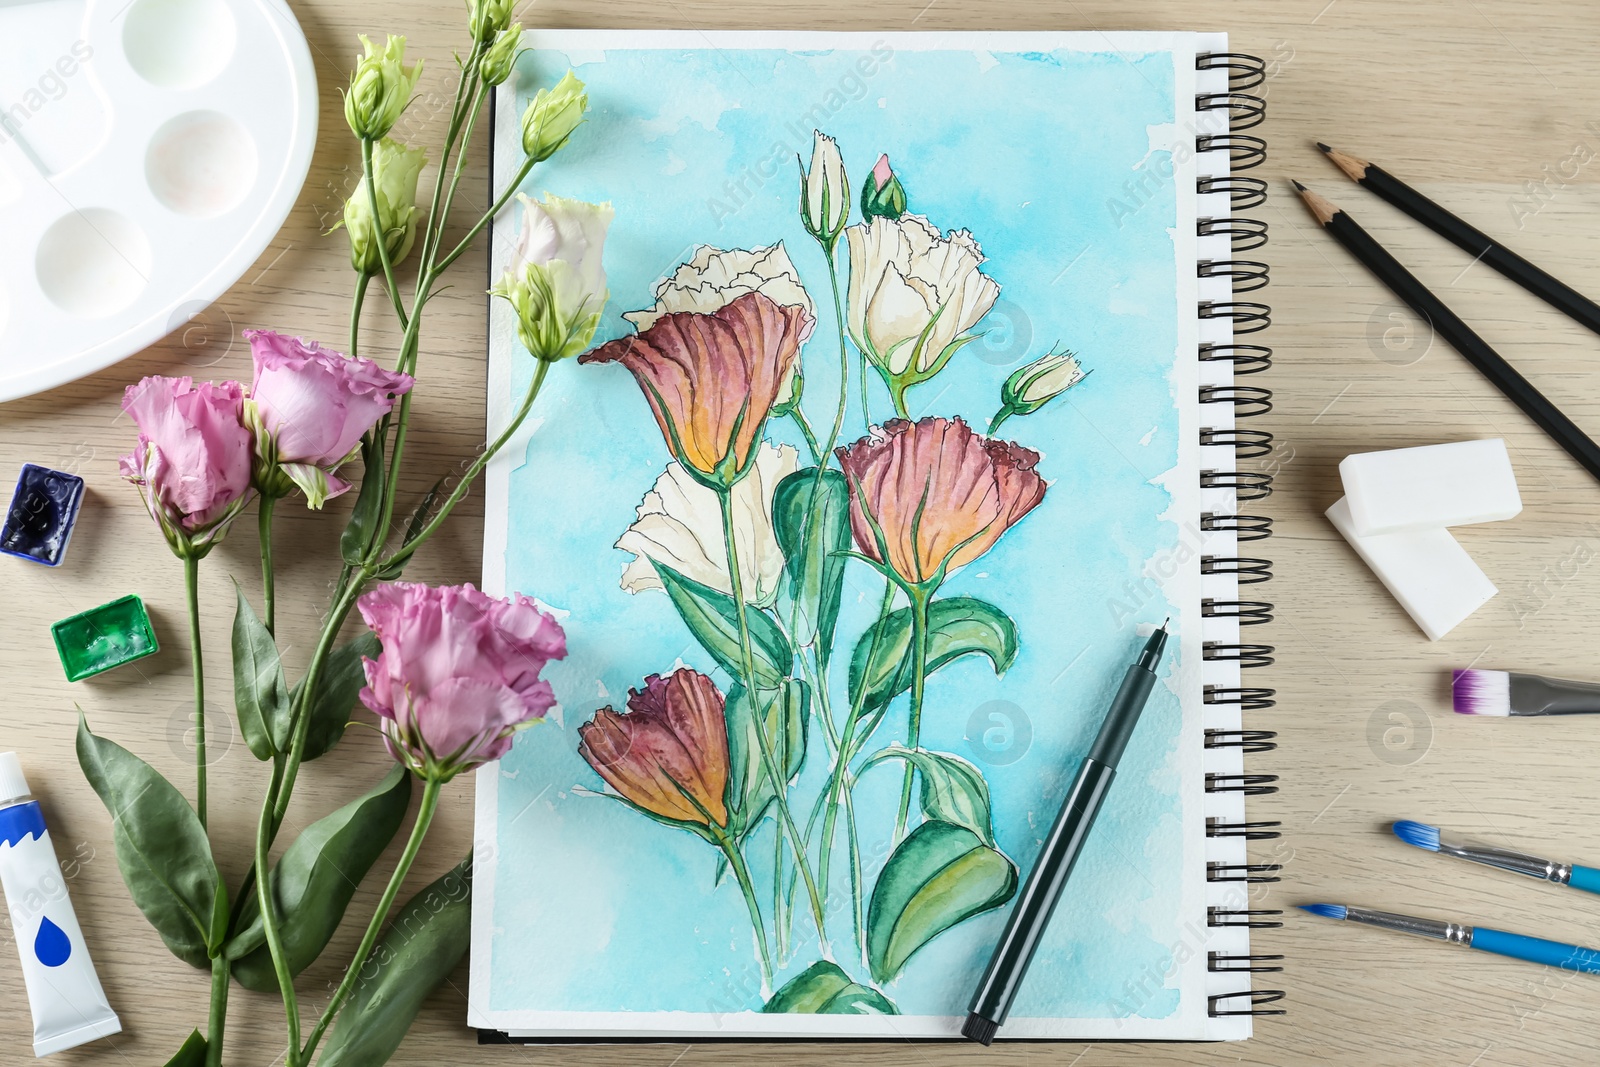 Photo of Painting of eustomas in sketchbook, flowers and art supplies on wooden table, flat lay